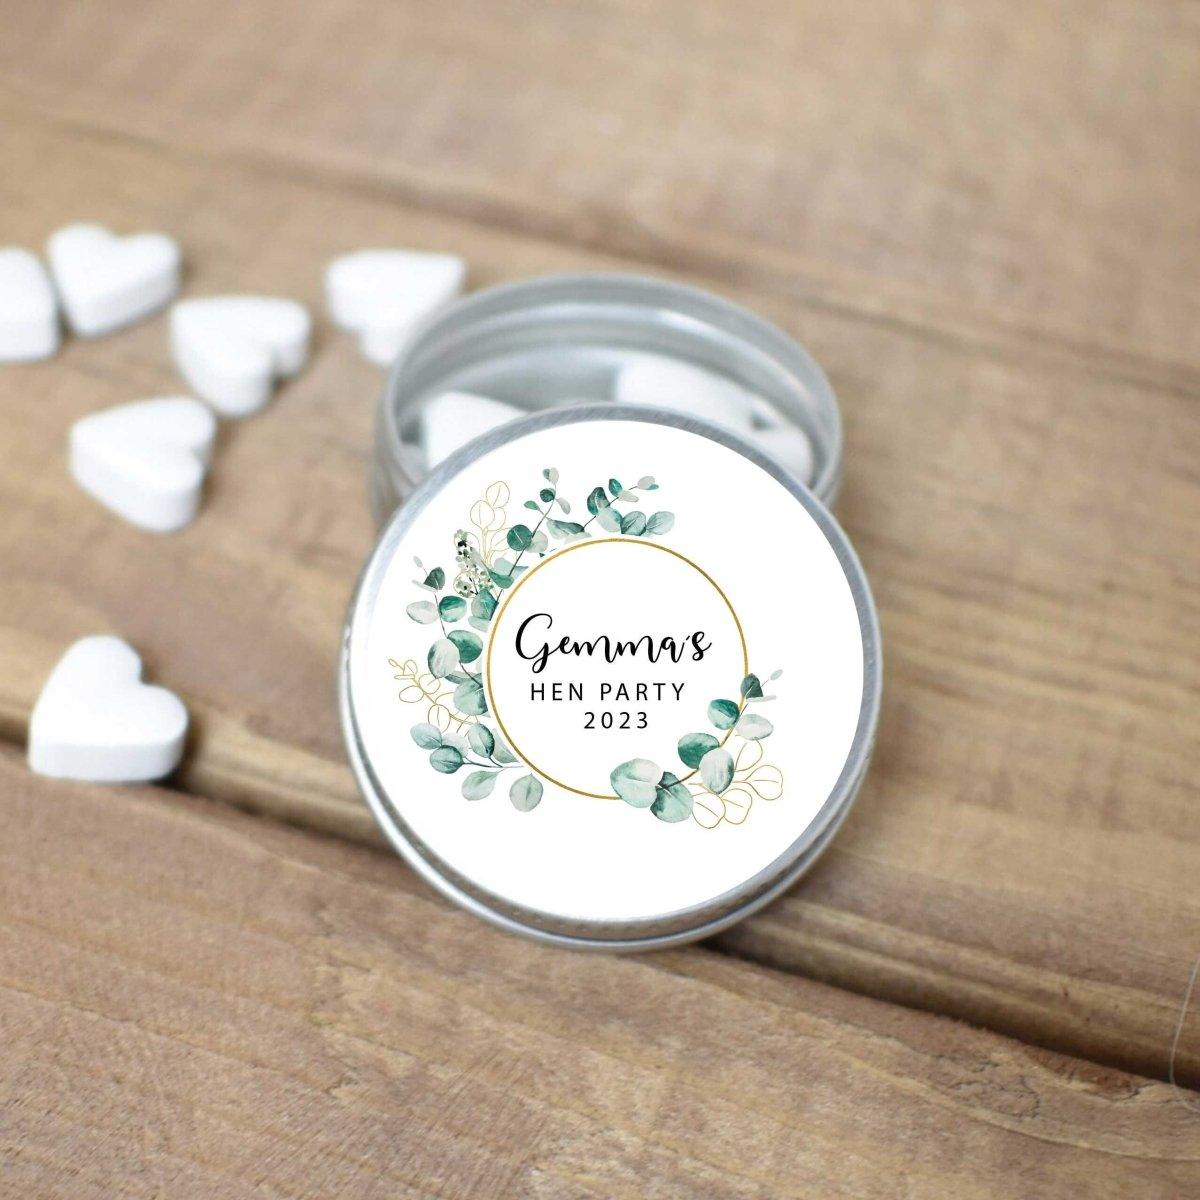 Bridesmaid Favour Mint Tin Personalised, Bridesmaid Proposal Gift, Bridesmaid Proposal, Bridesmaid Mint Tin, Small Bridal Party Gift, Party - Amy Lucy